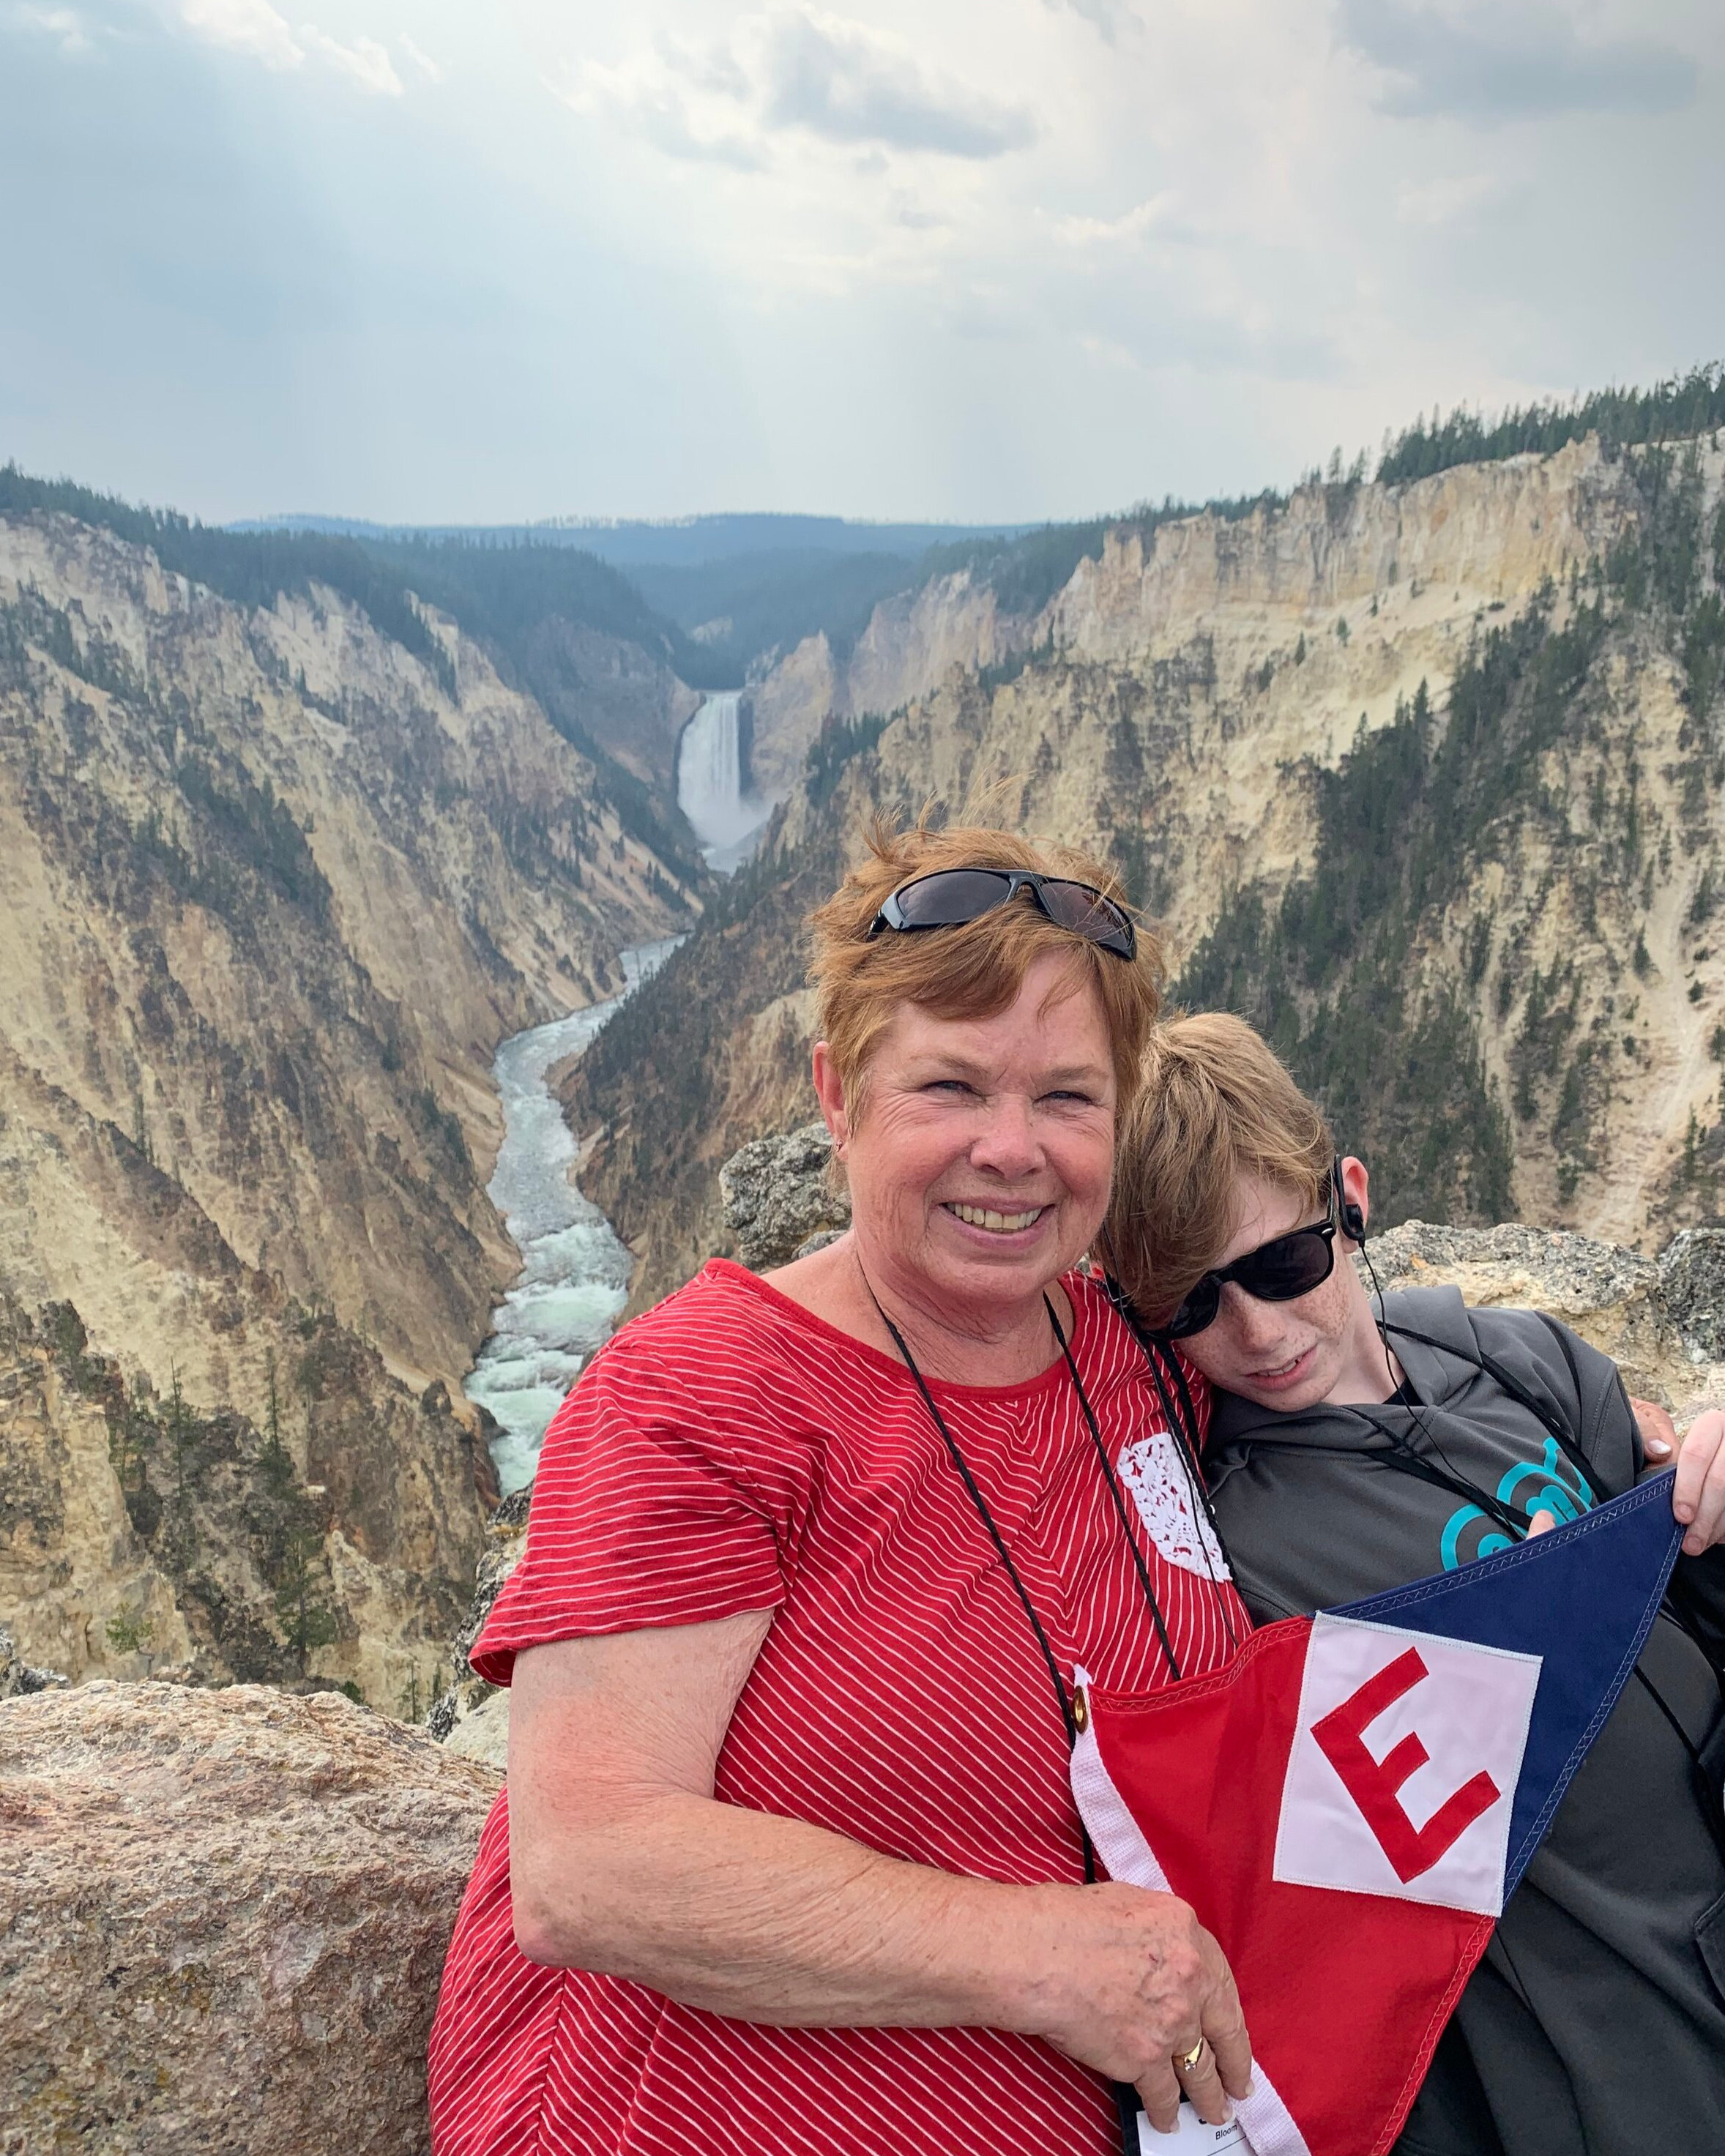  Susan and grandson Finn show their colors in Yellowstone National Park 